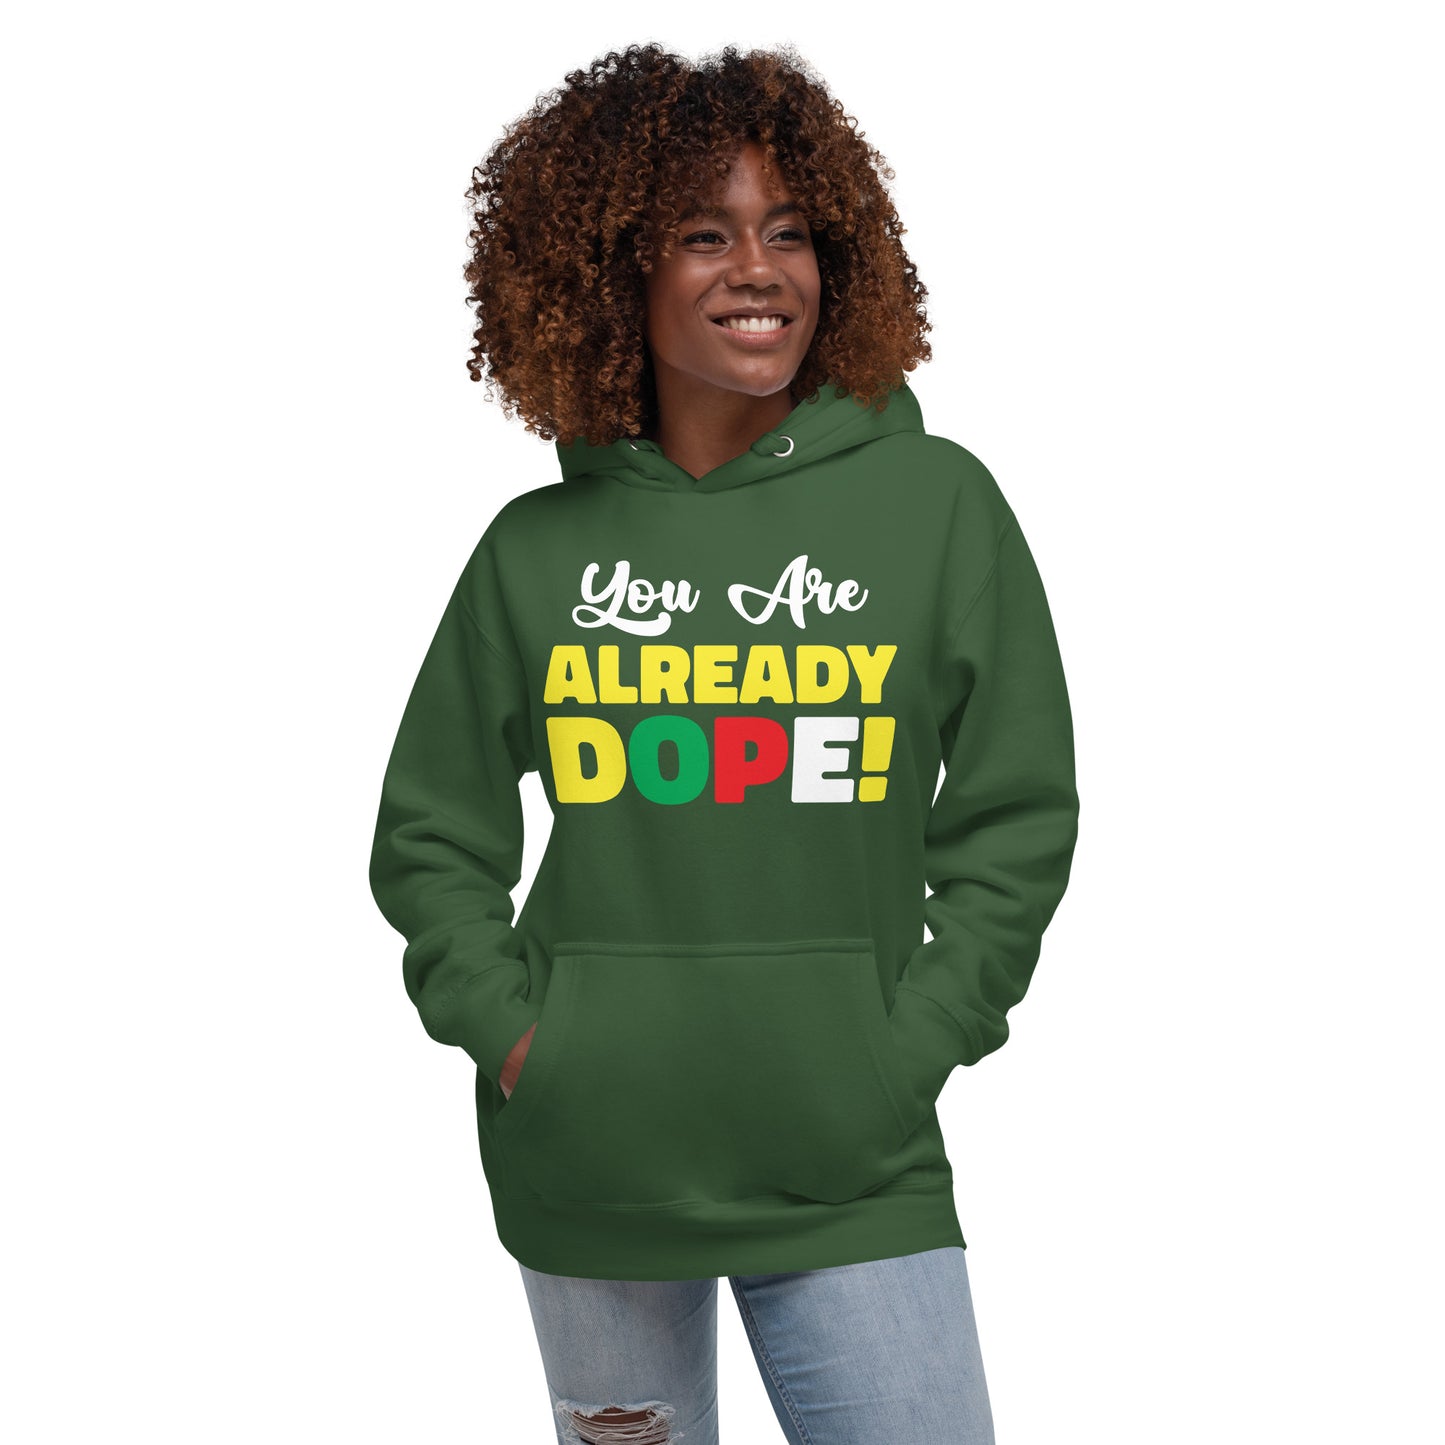 You Are Already Dope! Hoodie